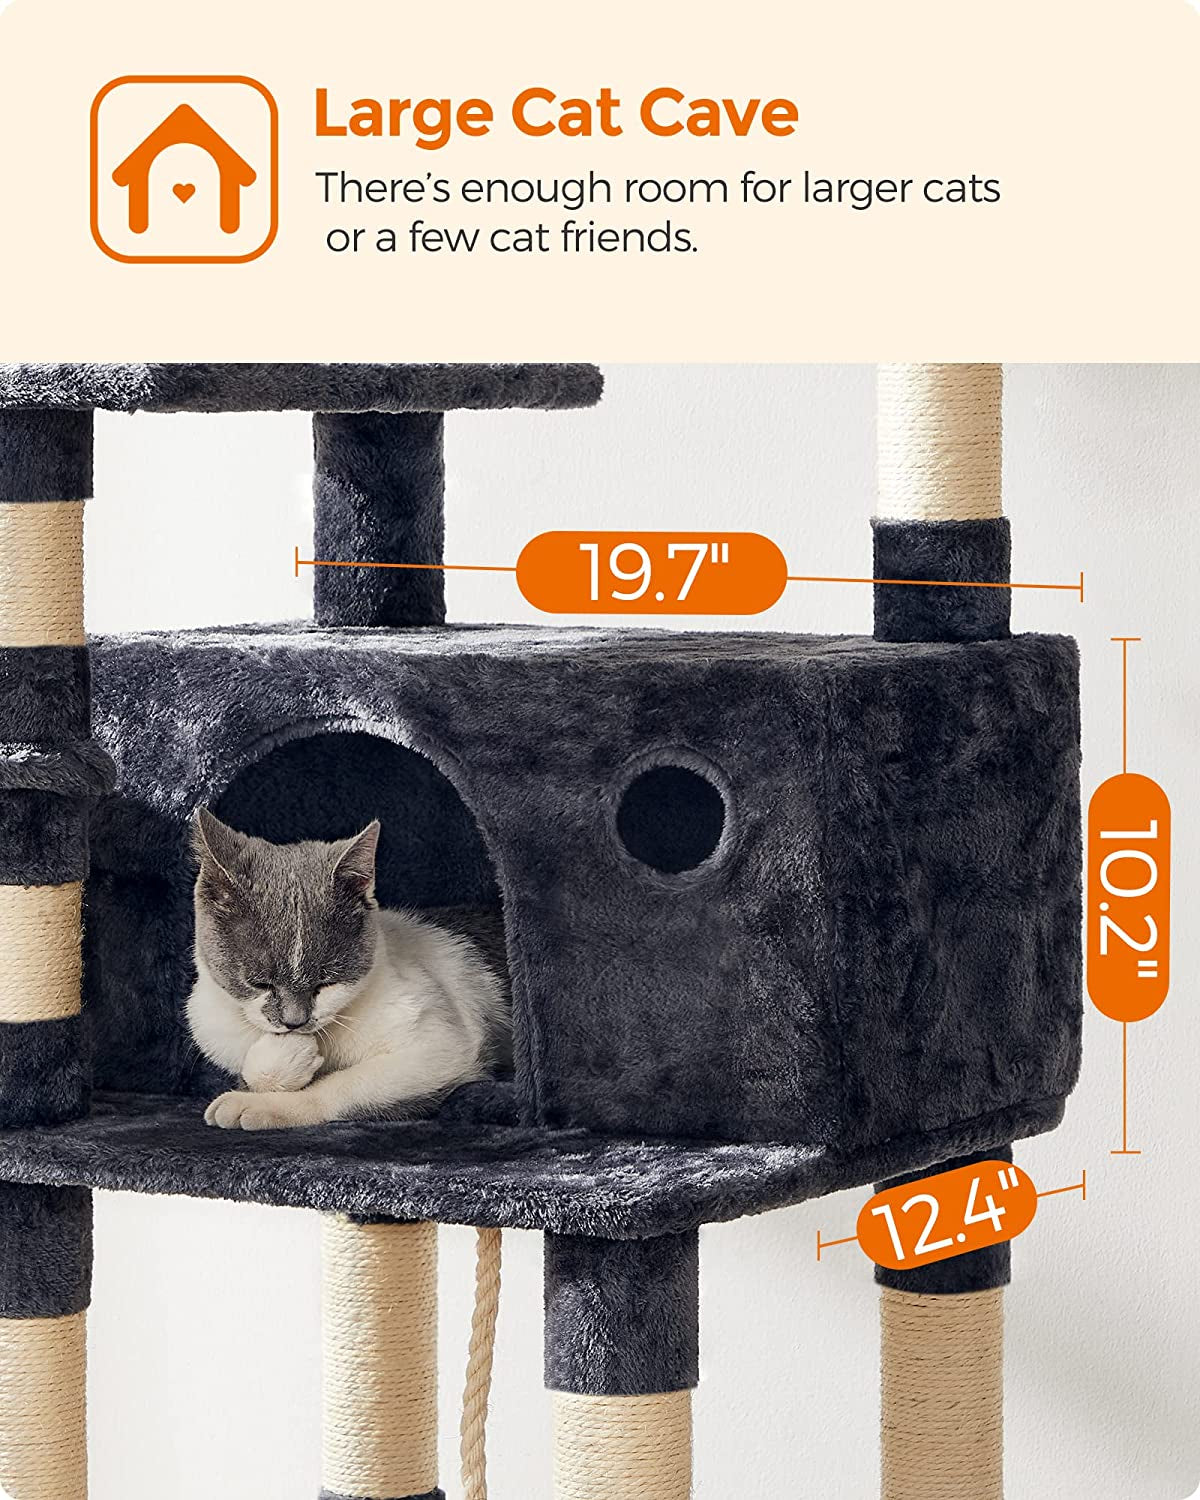 Cat Tree, Large Cat Tower, 64.6 Inches, Cat Activity Center with Hammock, Basket, Removable Fur Ball Sticks, Cat Condo, Smoky Gray UPCT087G01